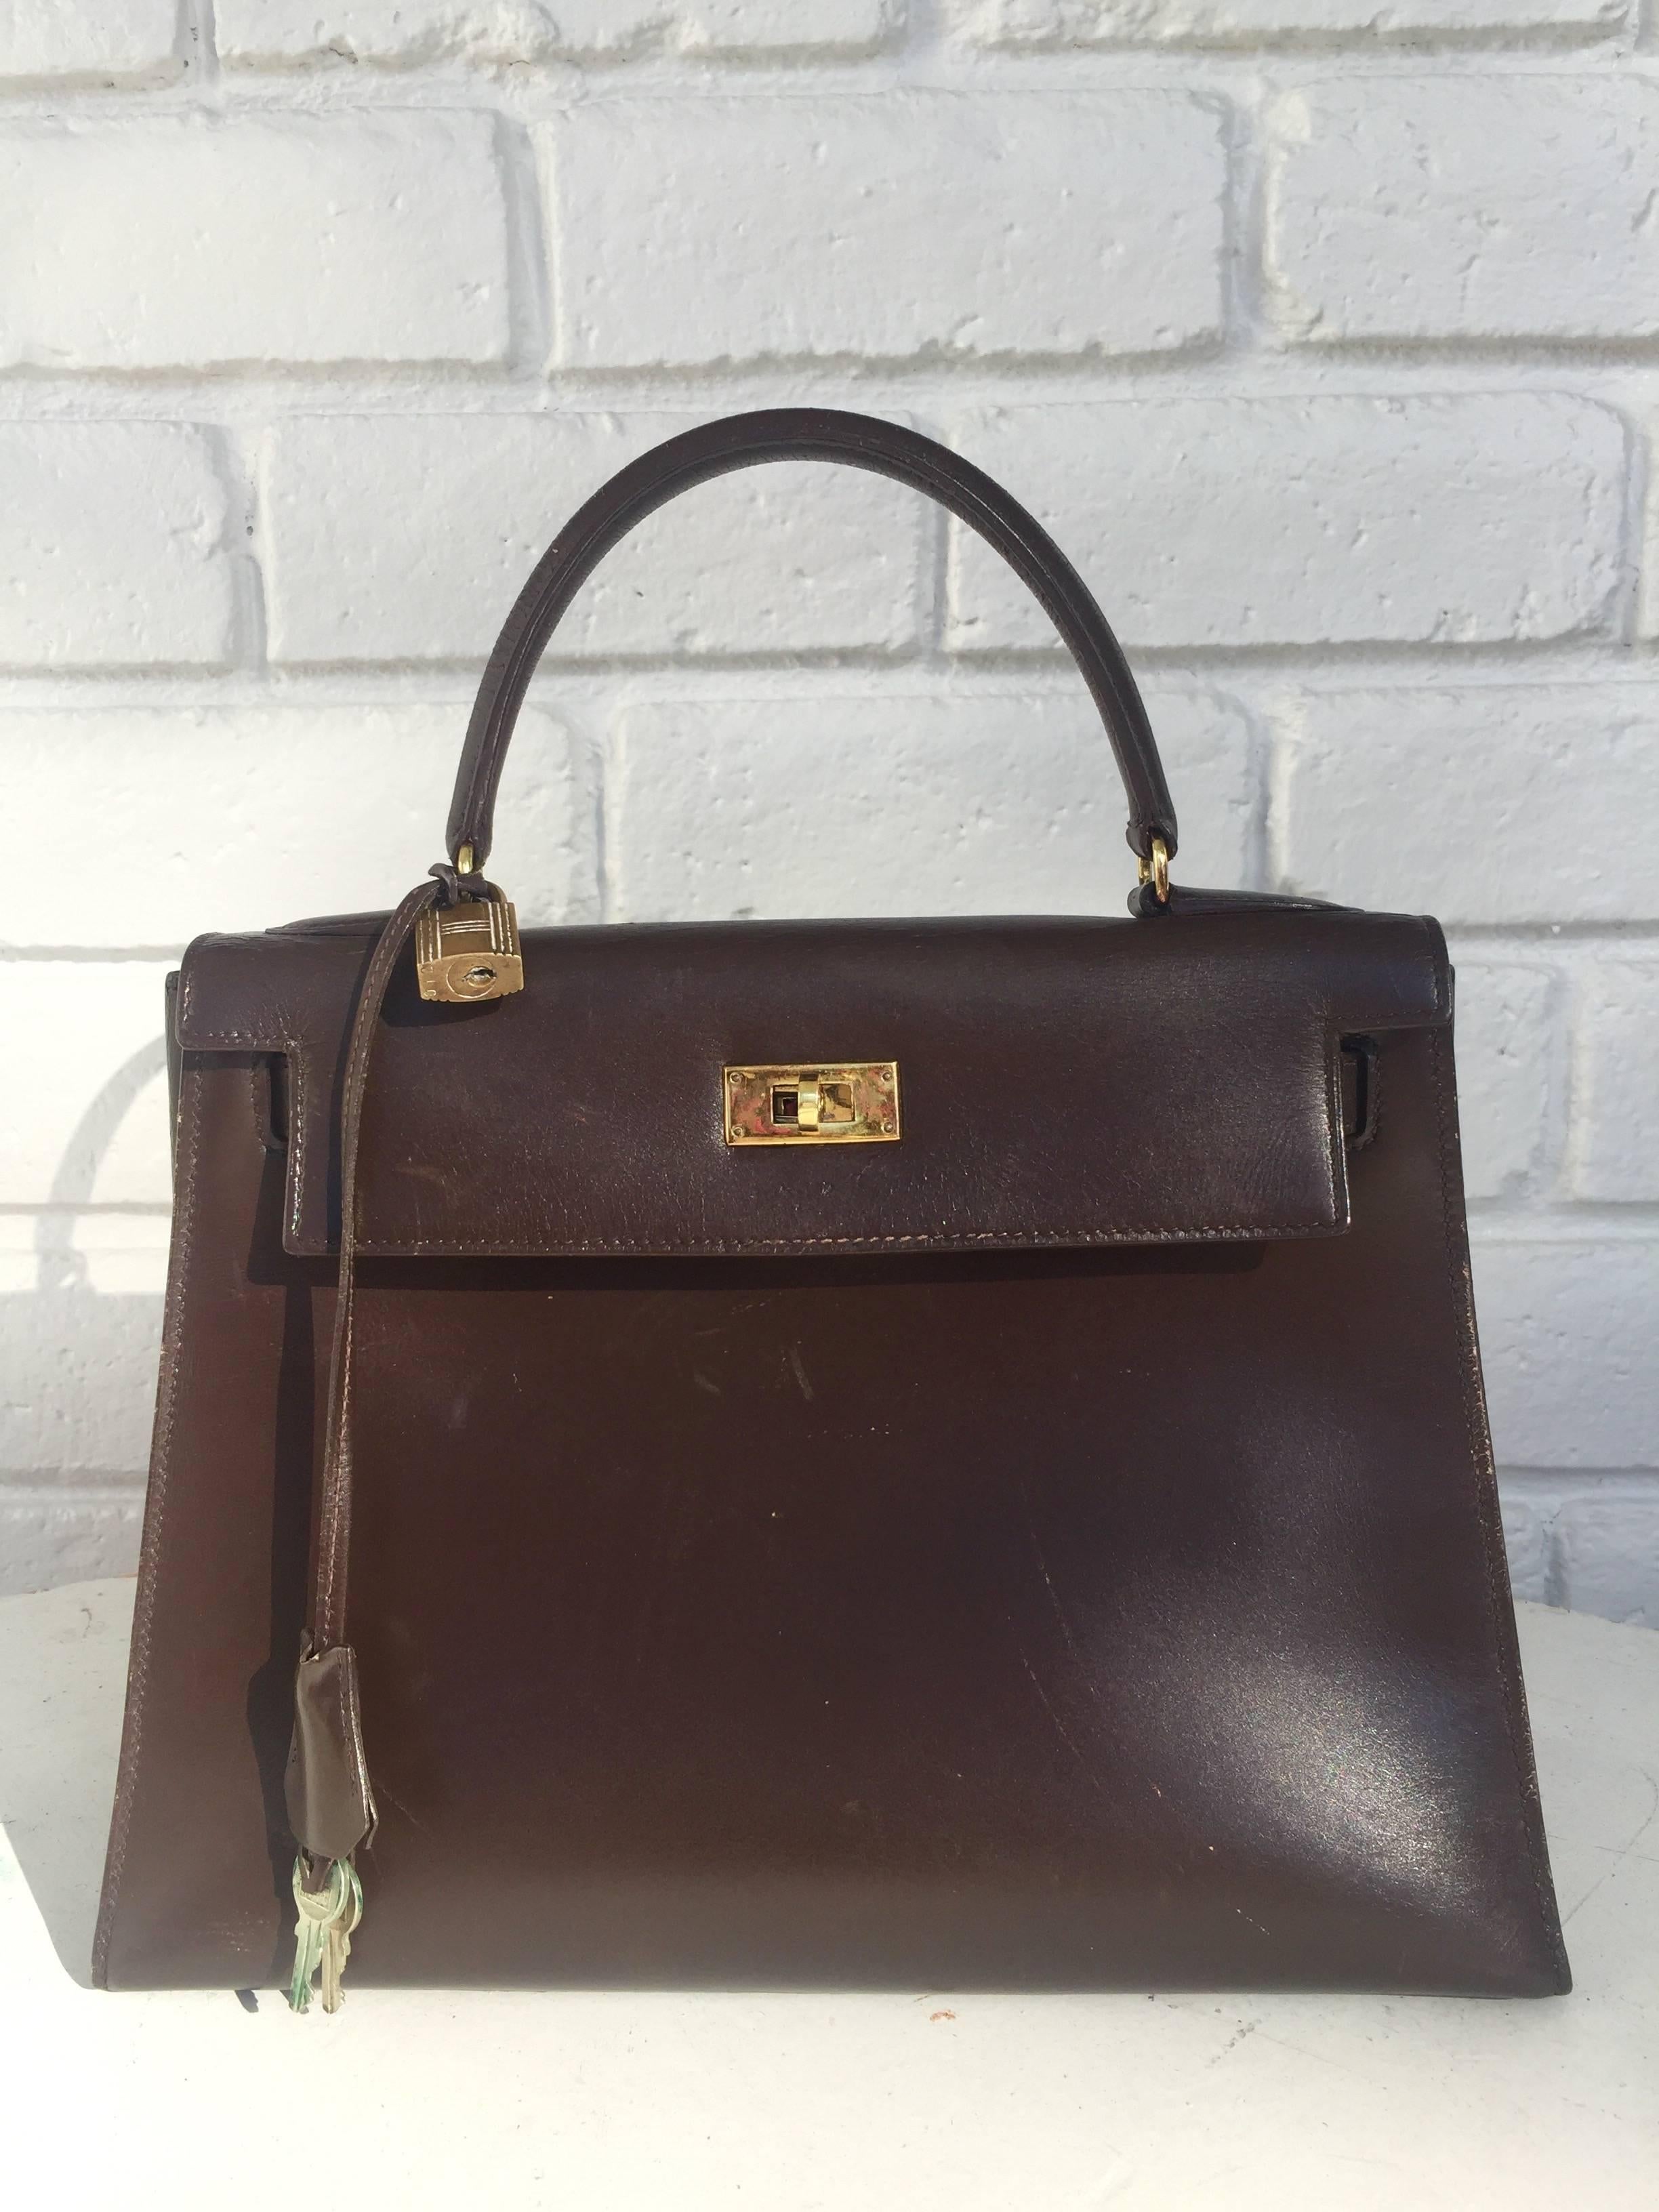 28cm Hermes Paris for Bonwit Teller Kelly Bag.
These bags were tetailed in the mid-late 1960s through seventies long before Hermes had their own boutiques in the USA.
This bag is chocolate brown gold box leather and fitted with bronzed